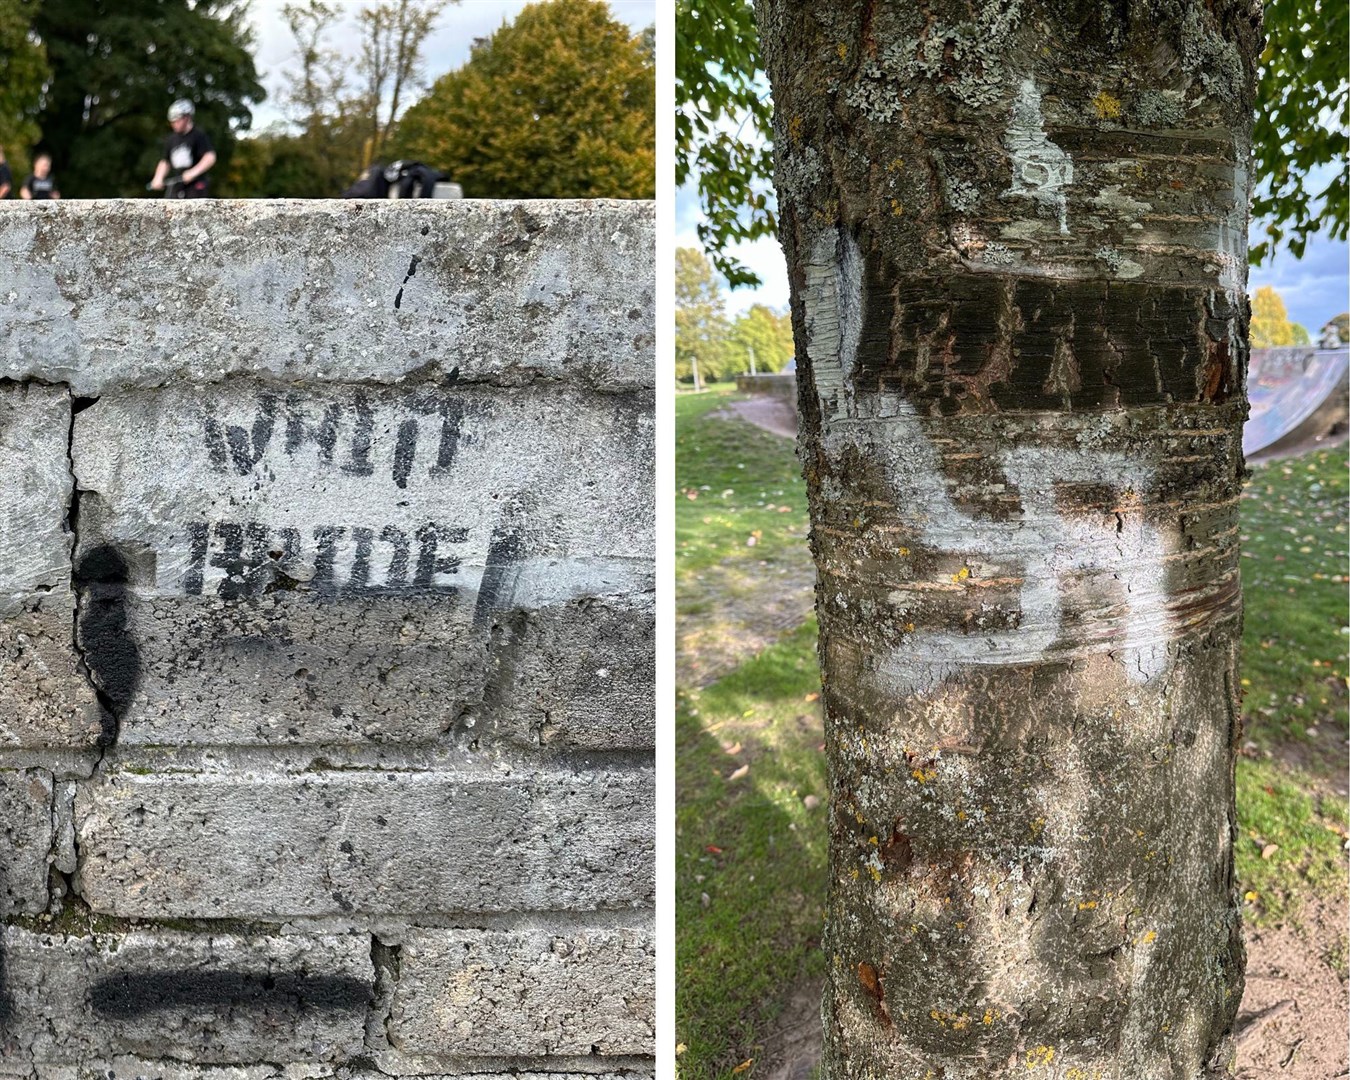 The graffiti includes infamous white supremacist slogans, a swastika, as well as the use of a racial slur.